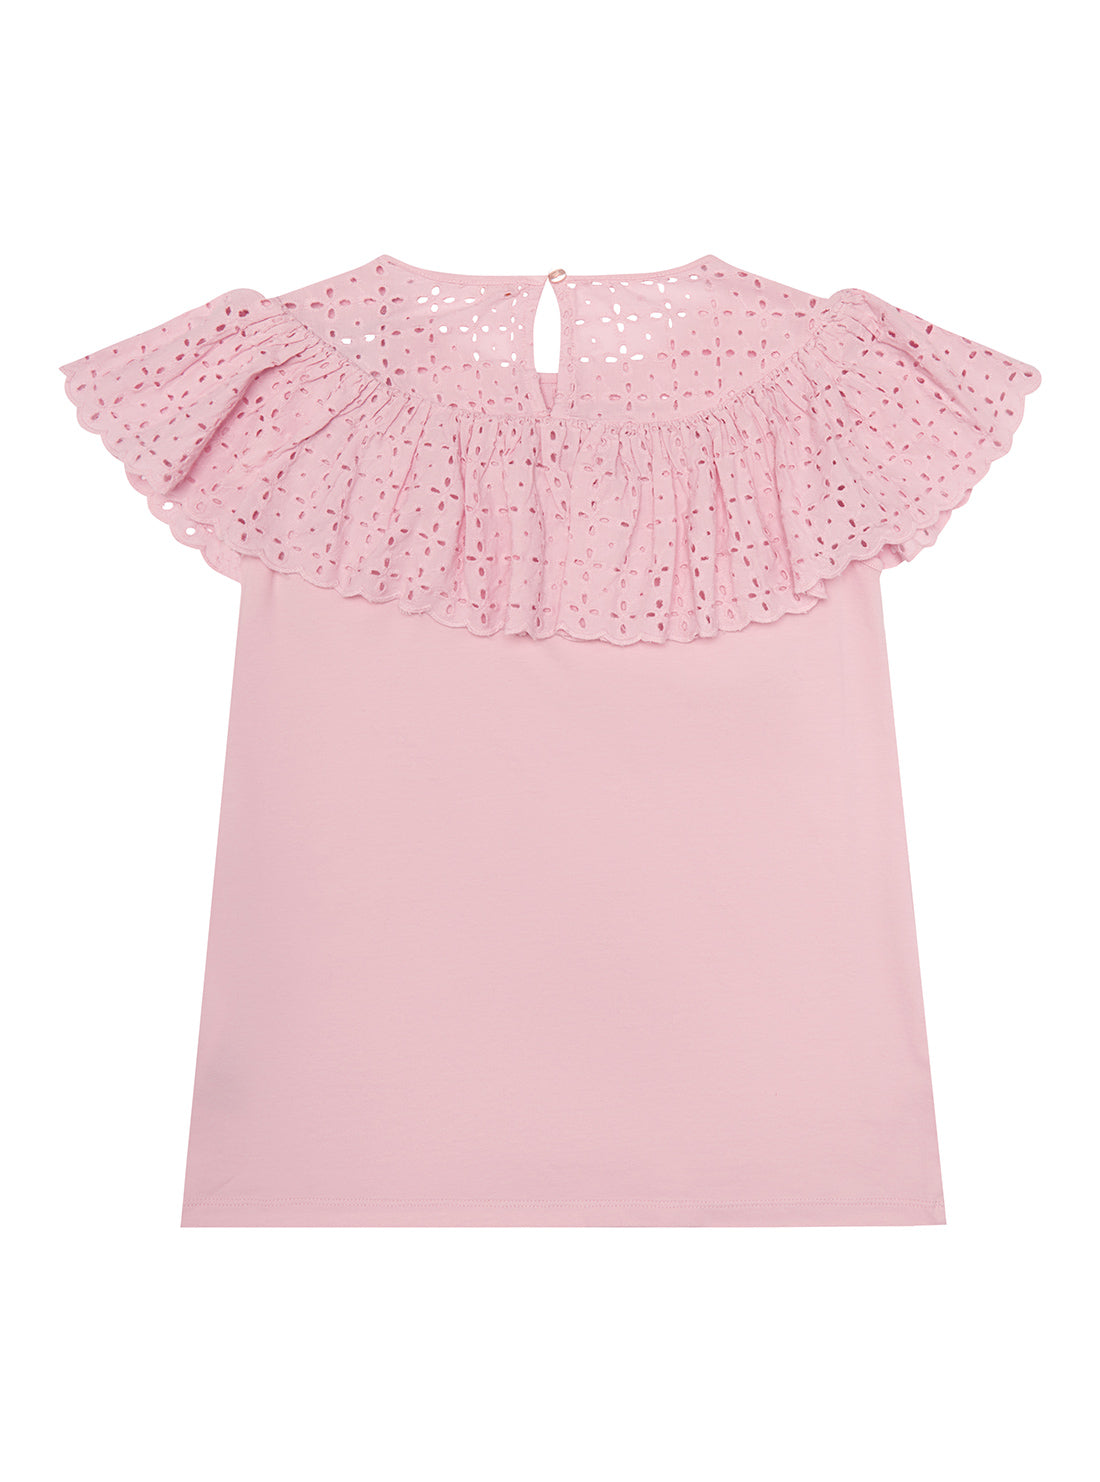 Pink Jersey Knit Top (7-16)